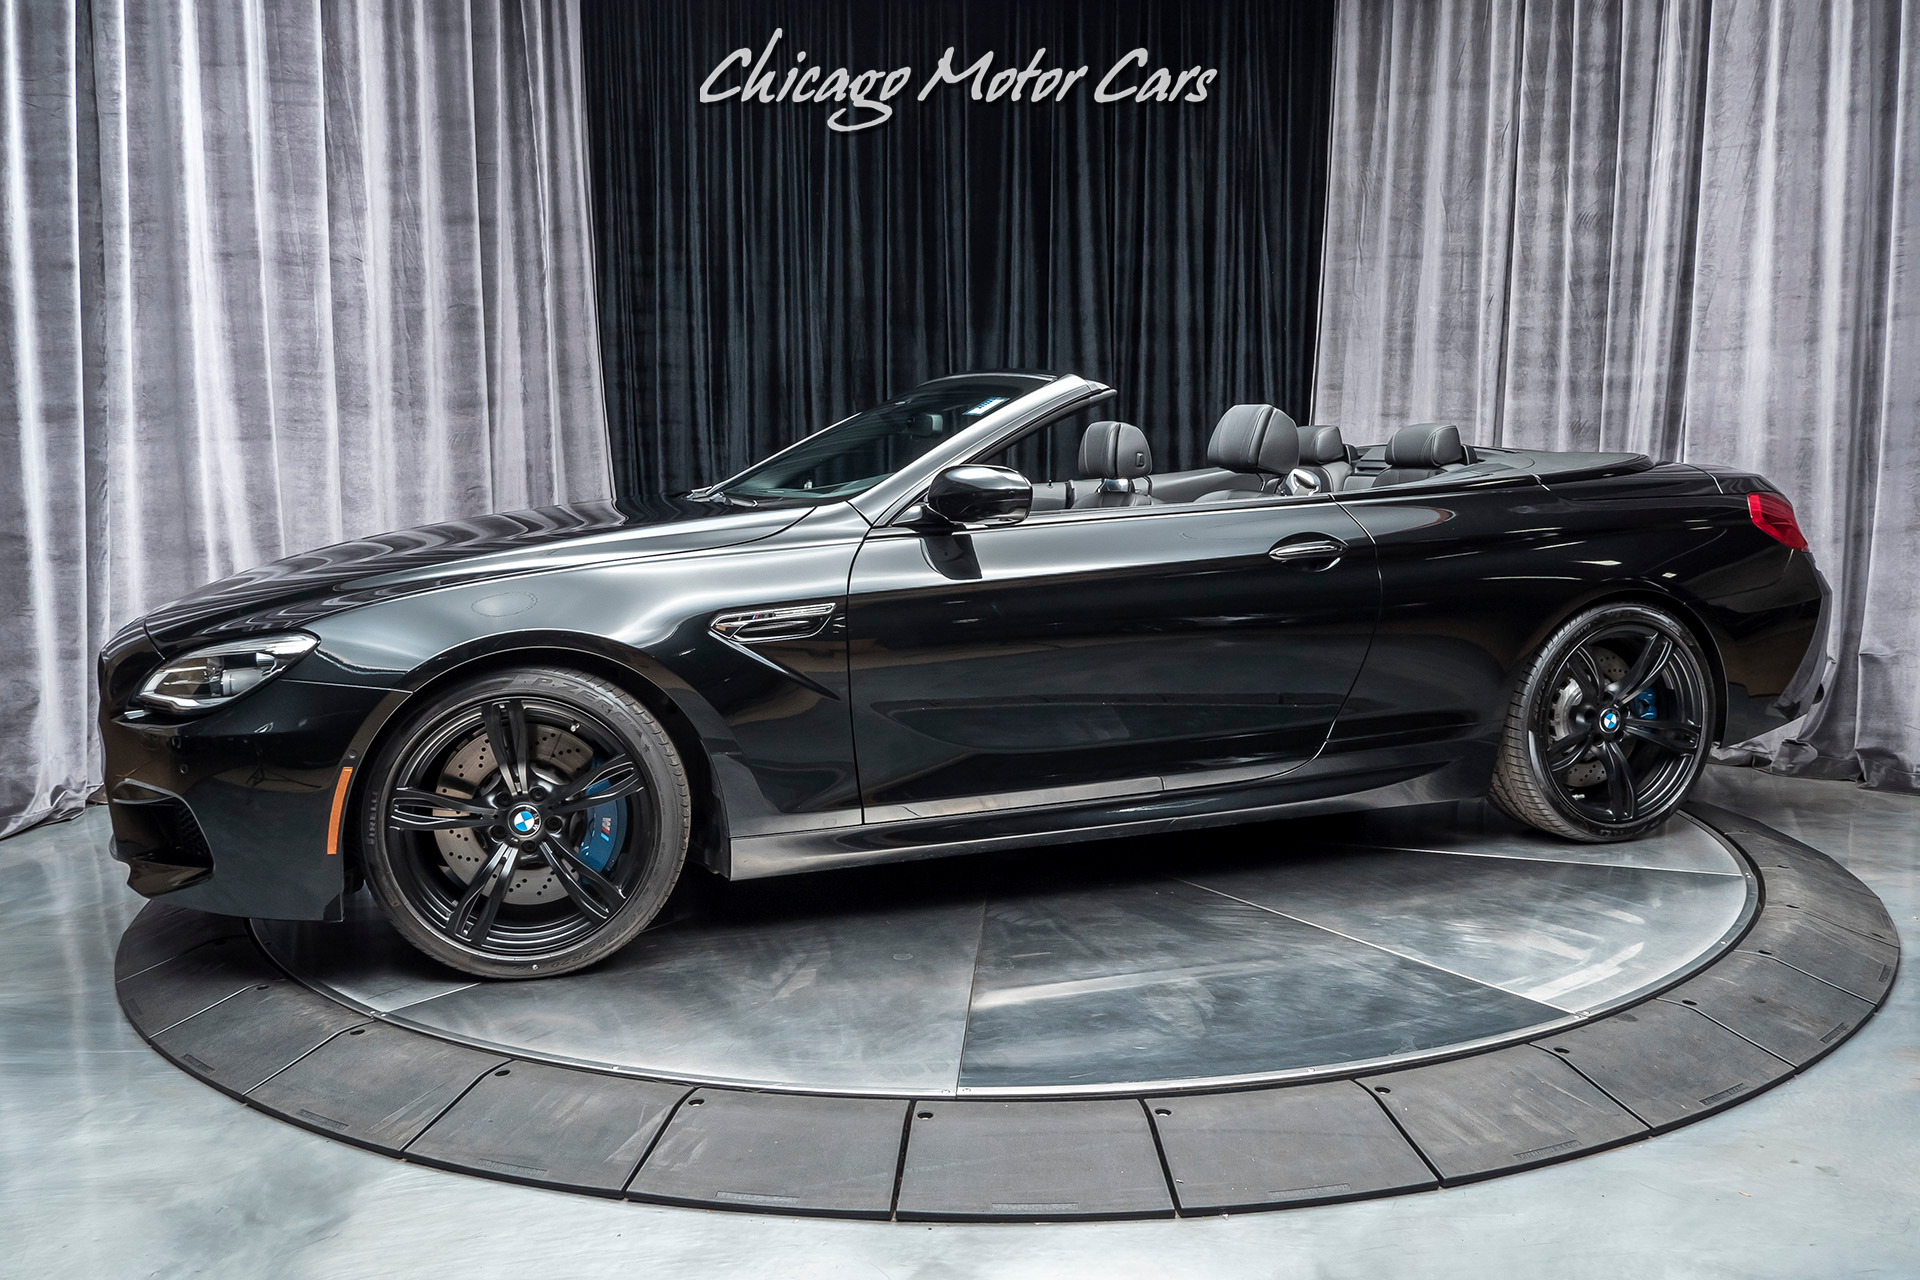 Used-2016-BMW-M6-Convertible-MSRP-139K-COMPETITION-AND-EXECUTIVE-PACKAGES